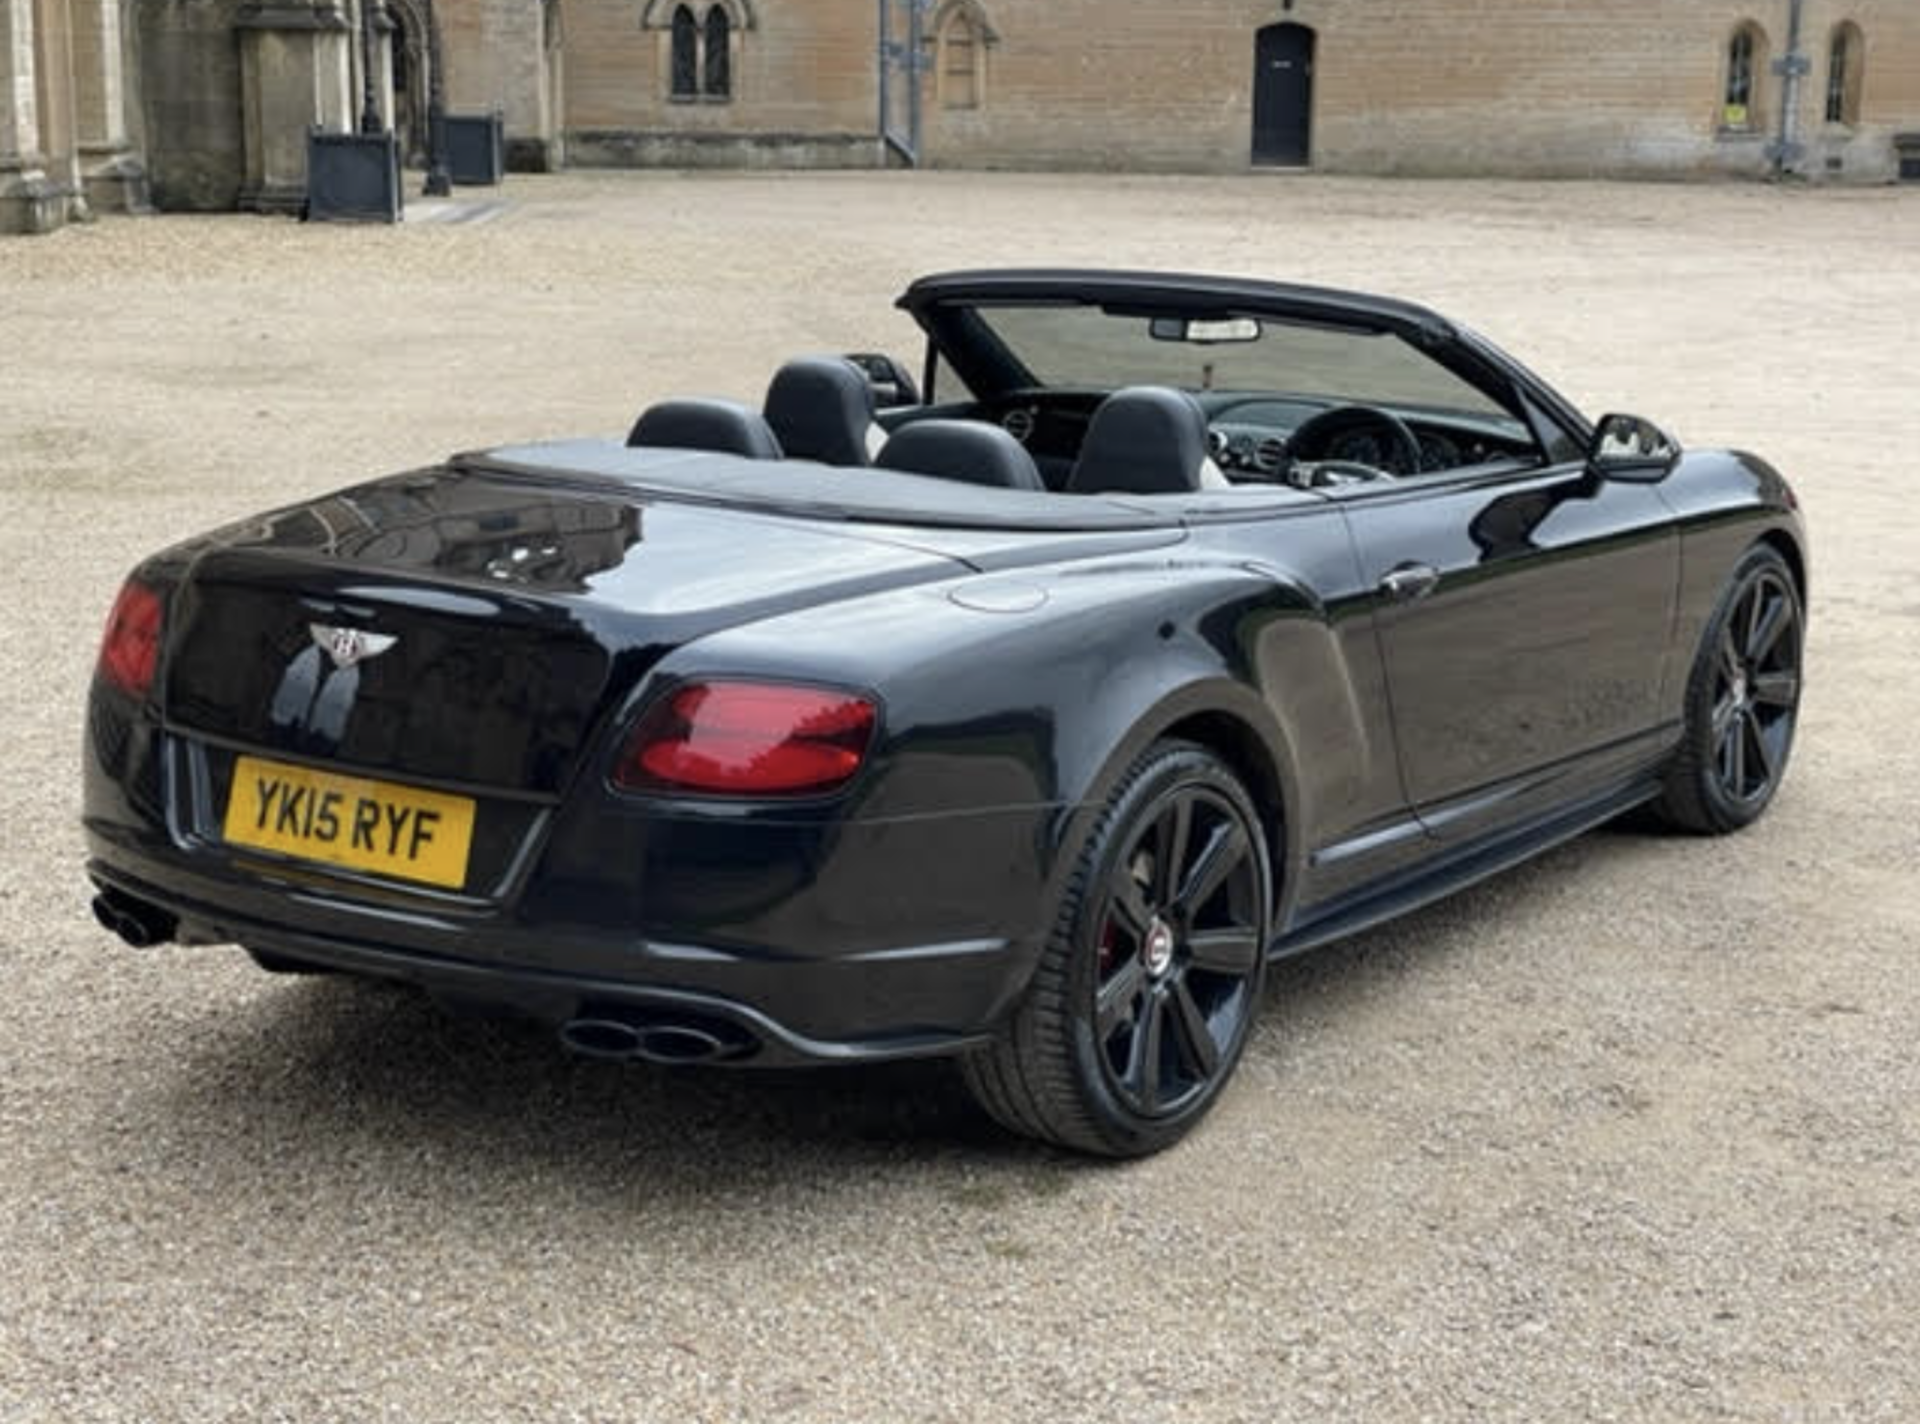 2015 Bentley Continental GTC 4.0 V8 S 2dr Auto Concourse series - Black pack 58,000 miles Full S/H - Image 17 of 18